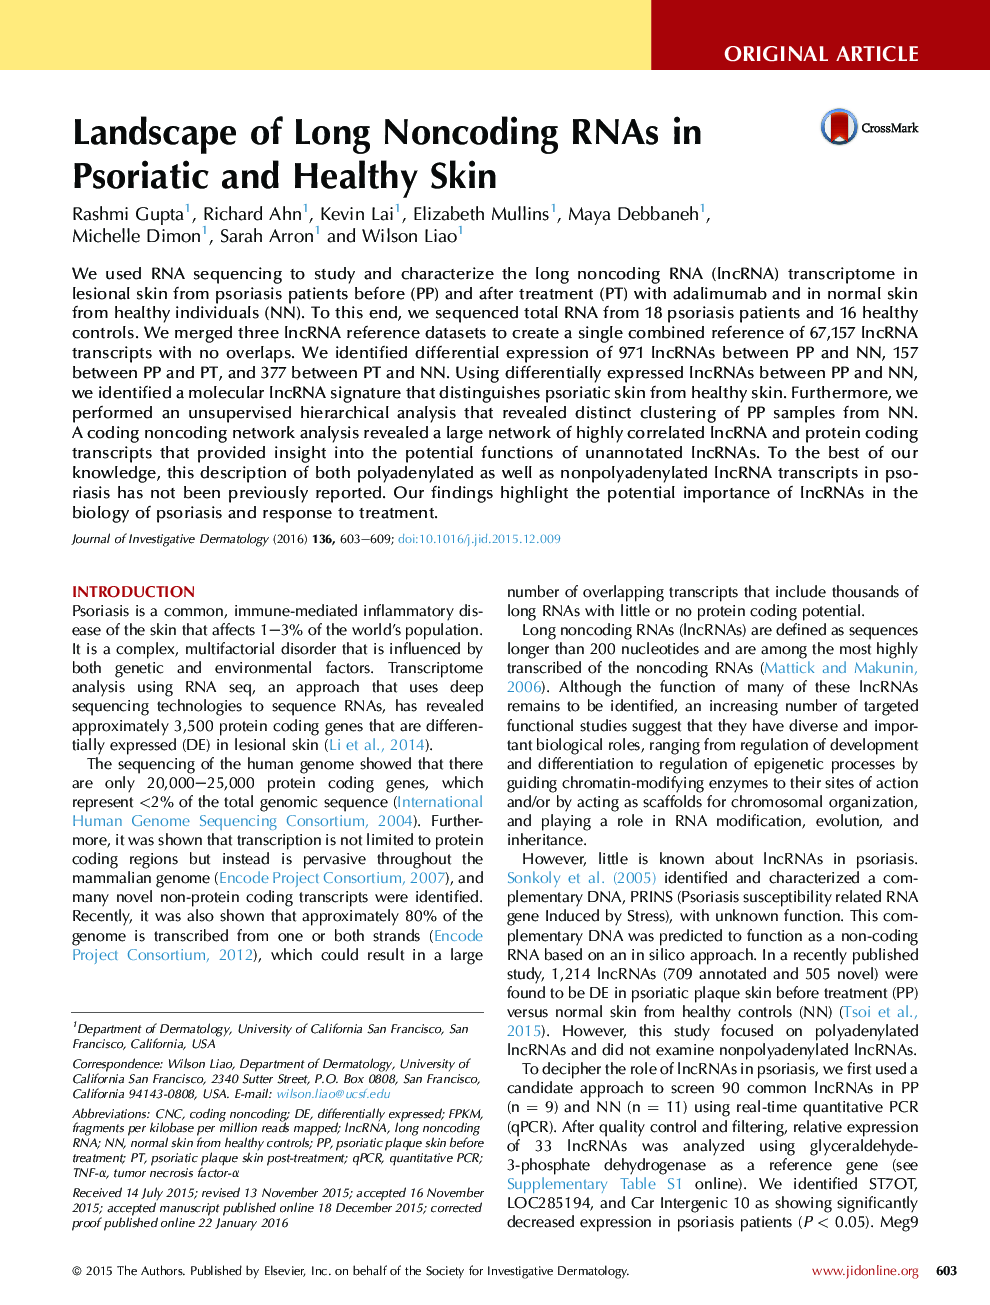 Landscape of Long Noncoding RNAs in Psoriatic and Healthy Skin